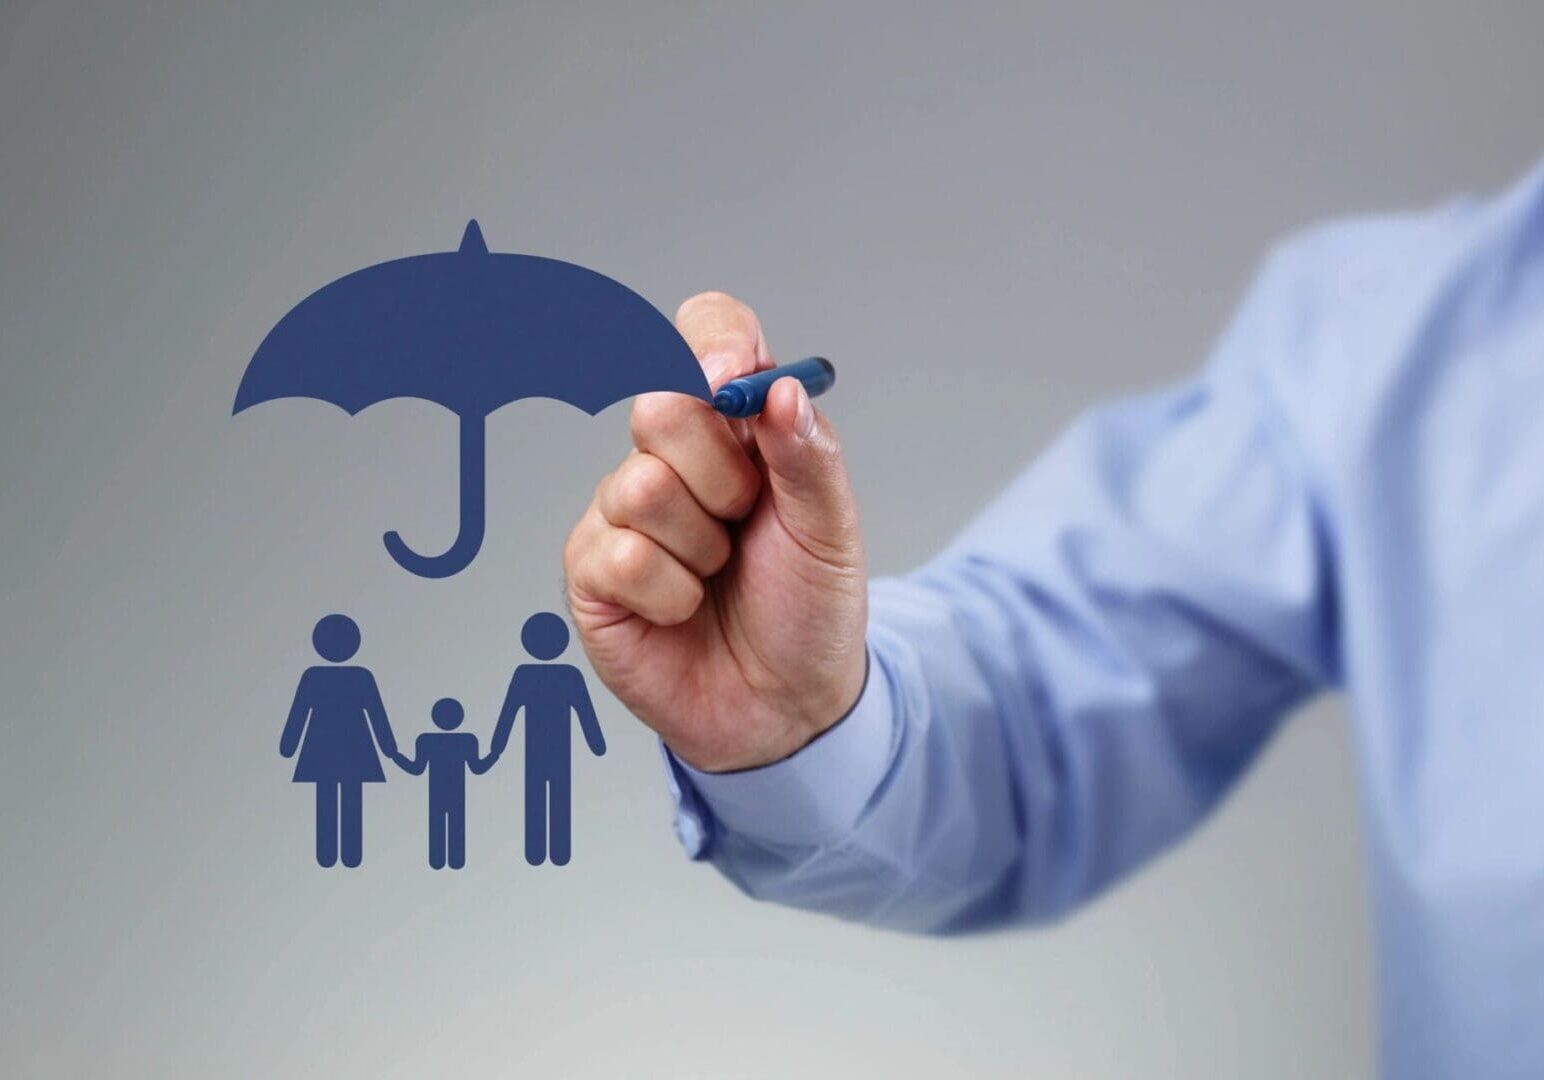 A person's hand drawing a blue umbrella over a family icon, symbolizing protection or insurance.